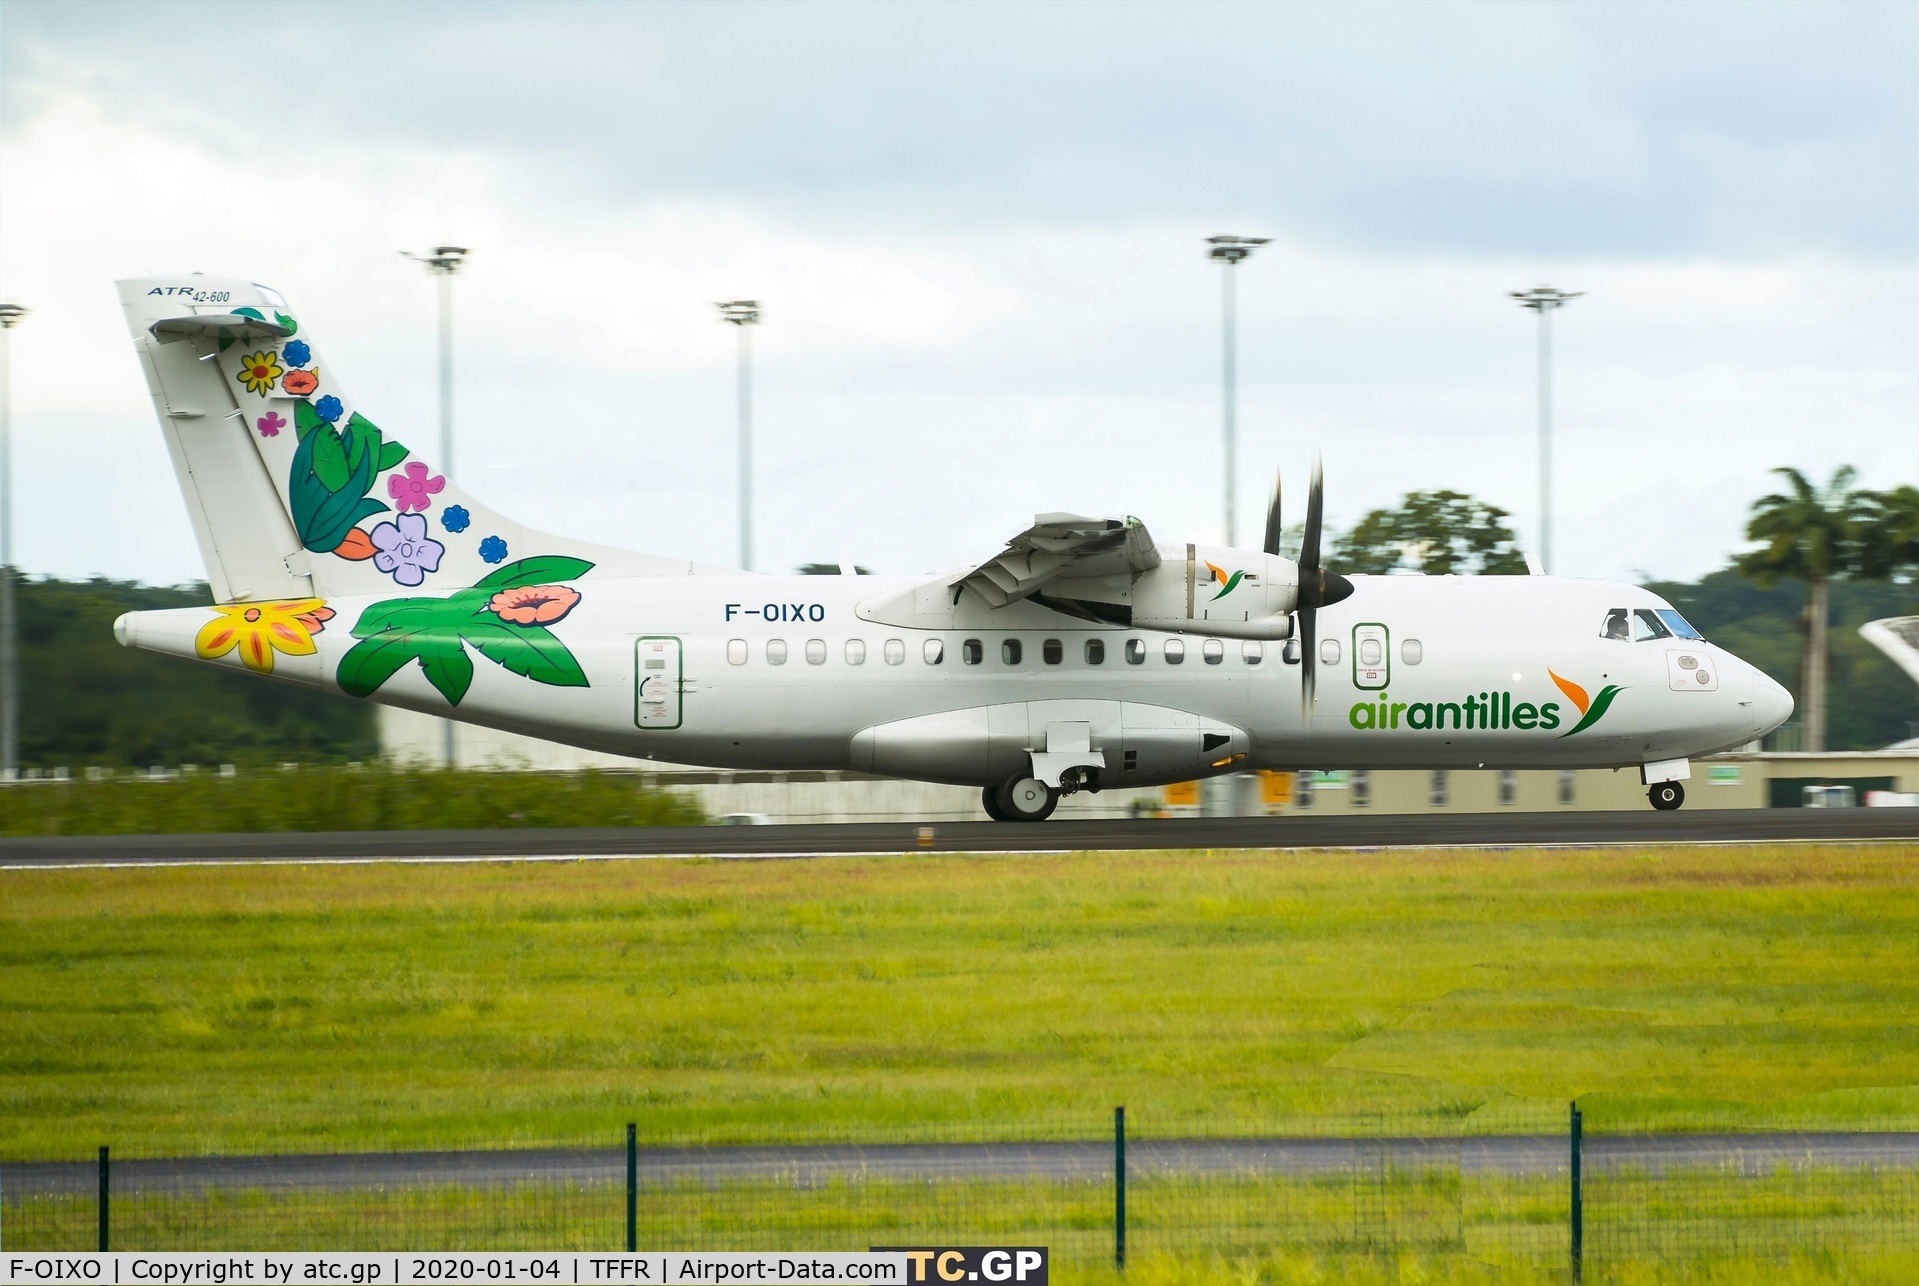 F-OIXO, 2013 ATR 42-600 C/N 1010, Air Antilles ATR42-600 just landed at Guadeloupe Pole Caraibes Airport (PTP)